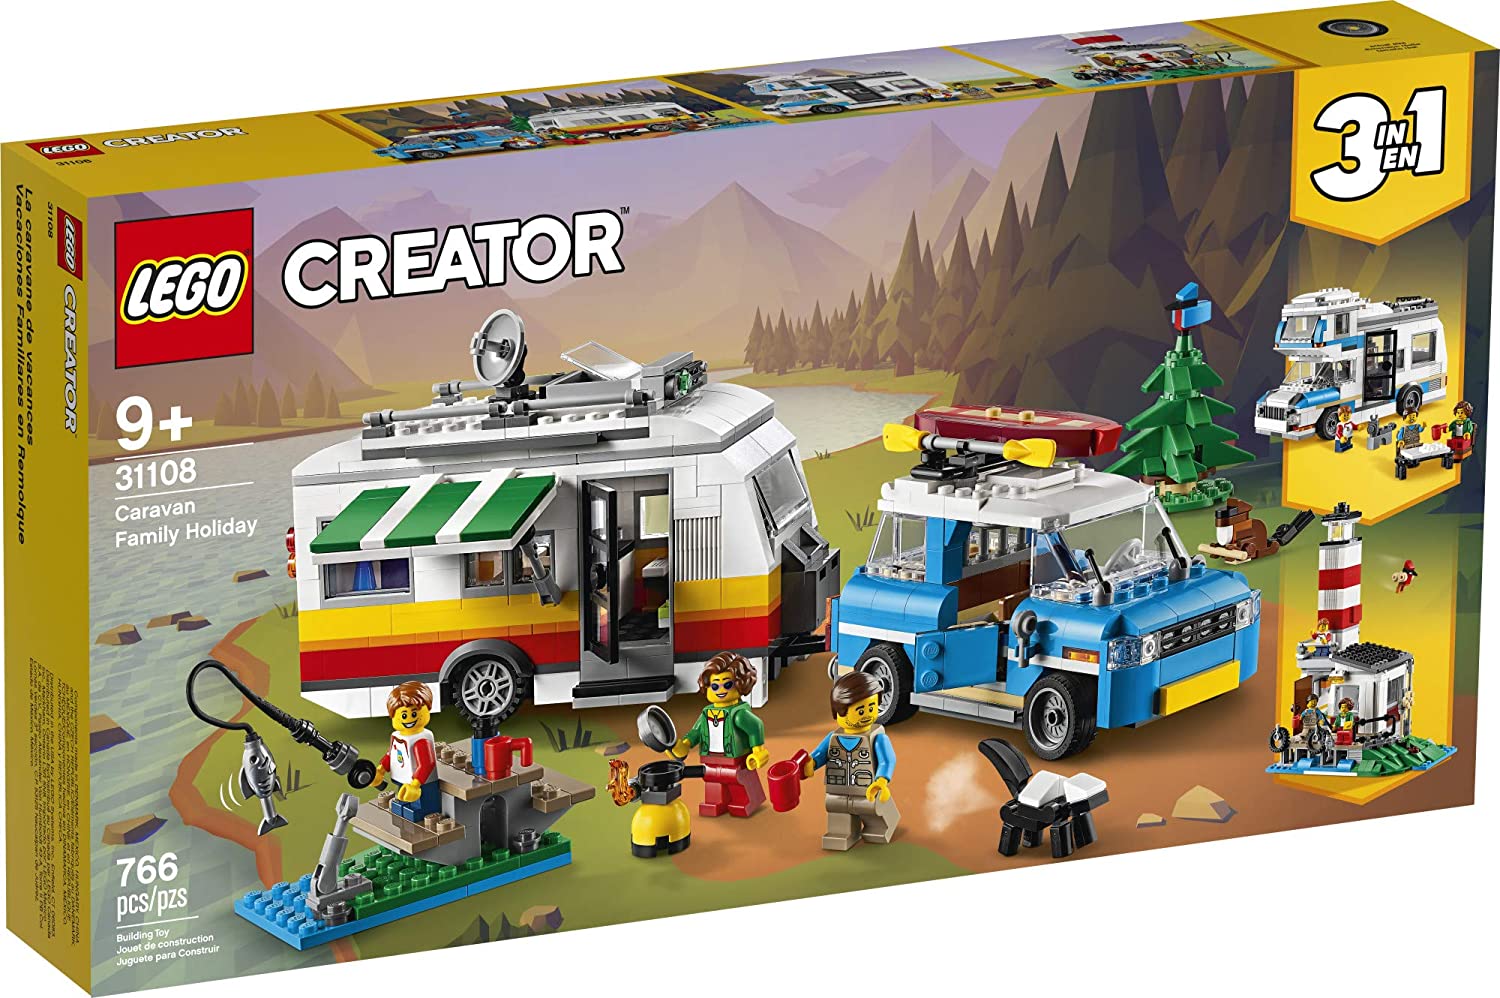 Lego 3in1 Caravan Family Holiday Vacation Toy Building Kit, 766 Pieces, -- ANB Baby